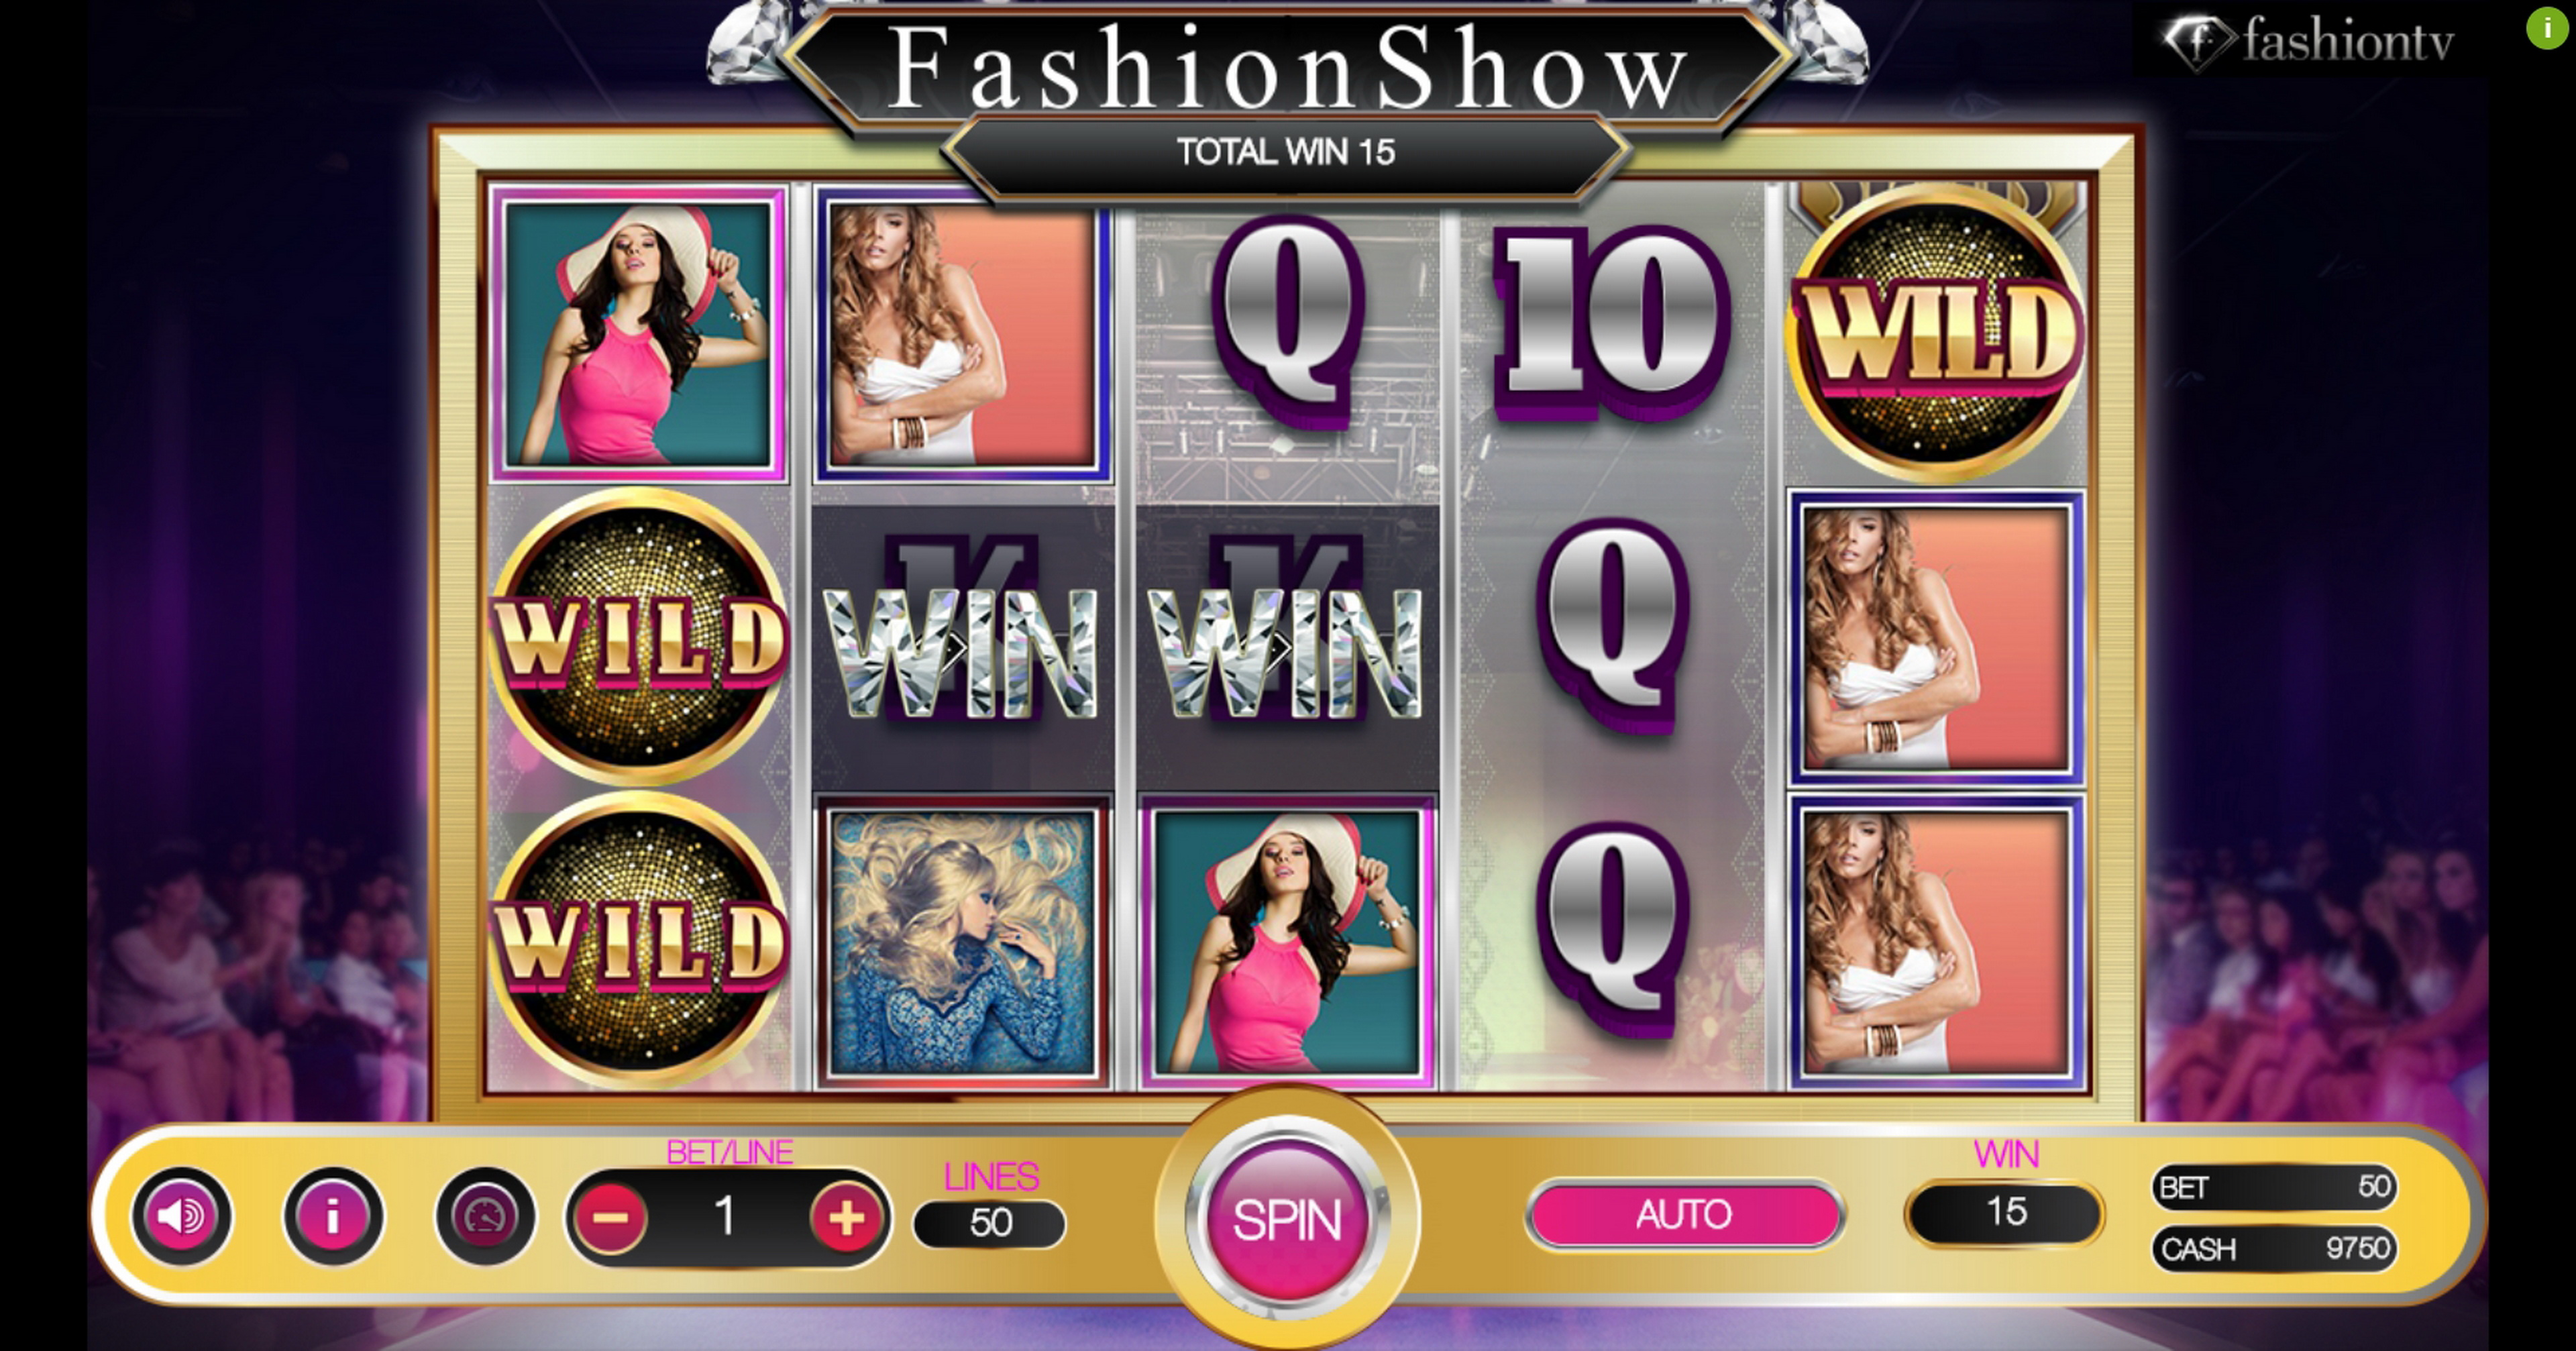 Win Money in Fashion Show Free Slot Game by Betconstruct